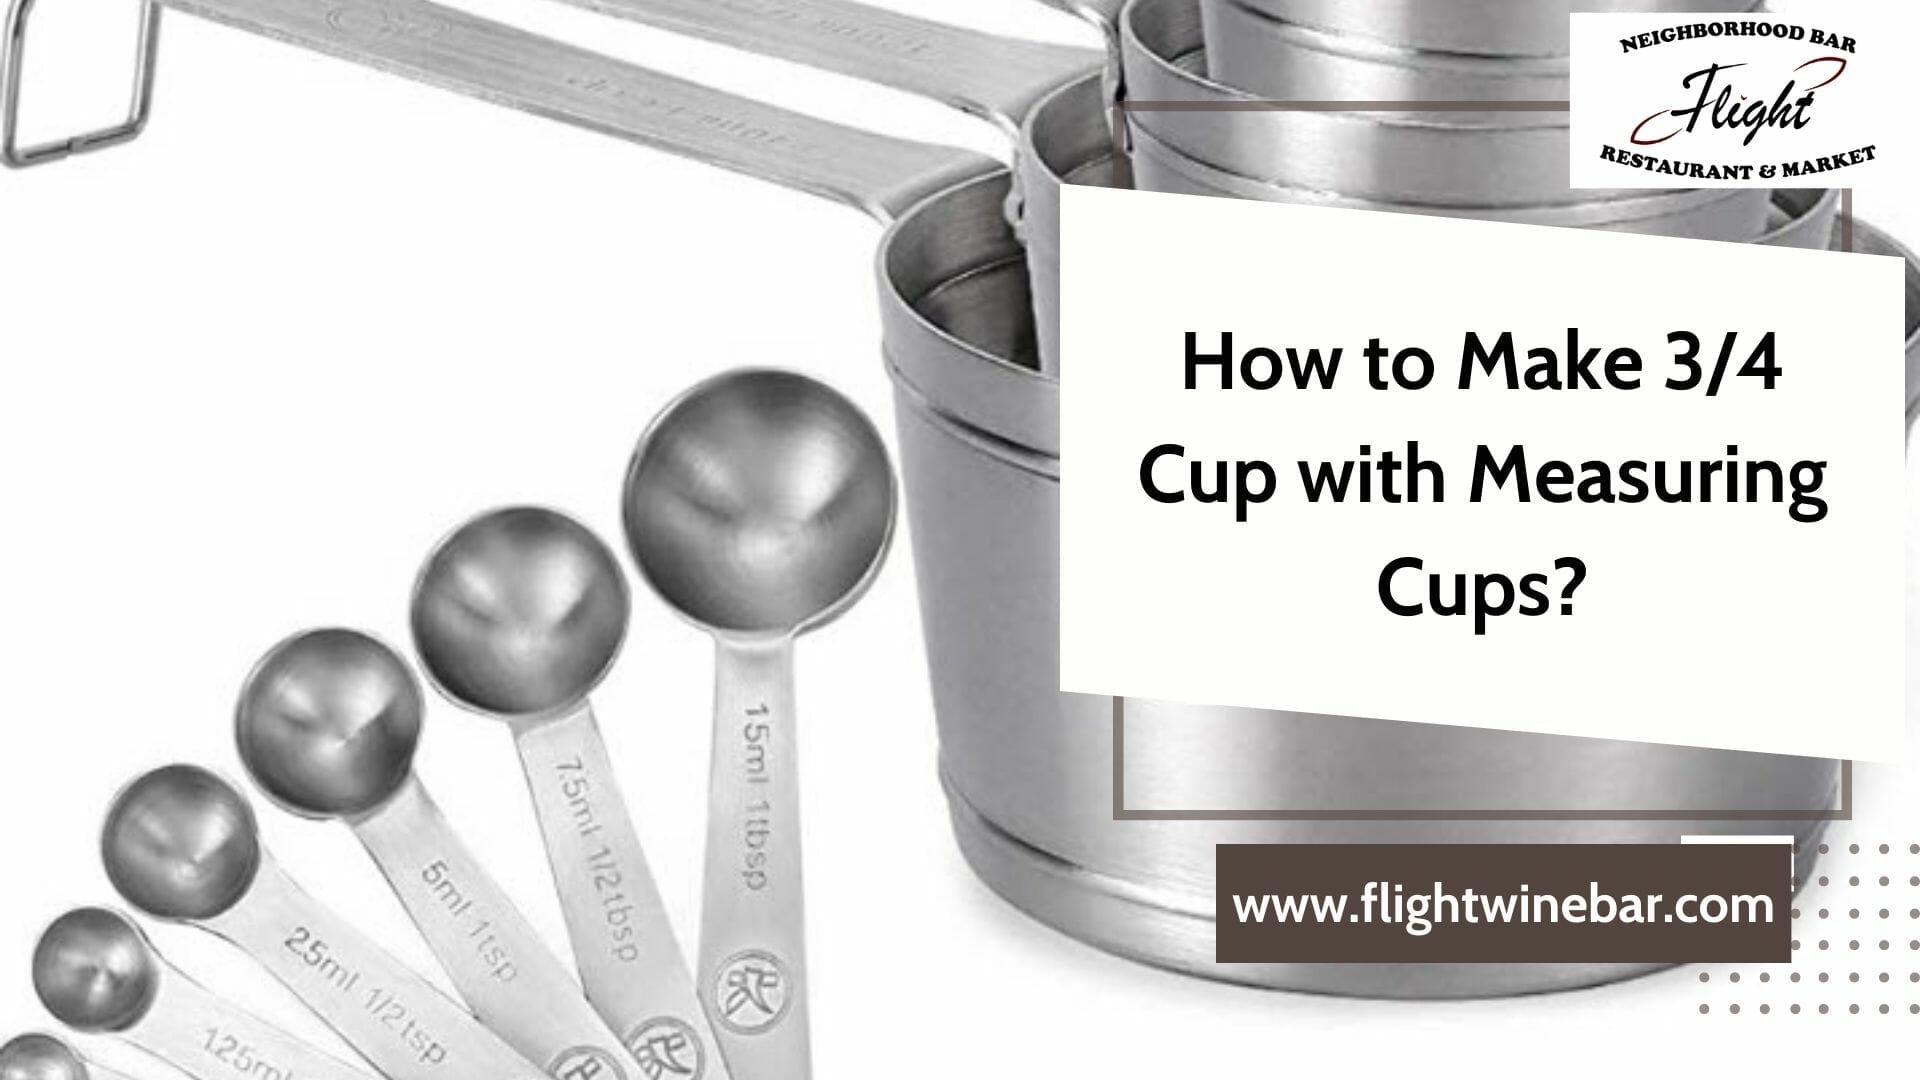 How to Make 3/4 Cup with Measuring Cups